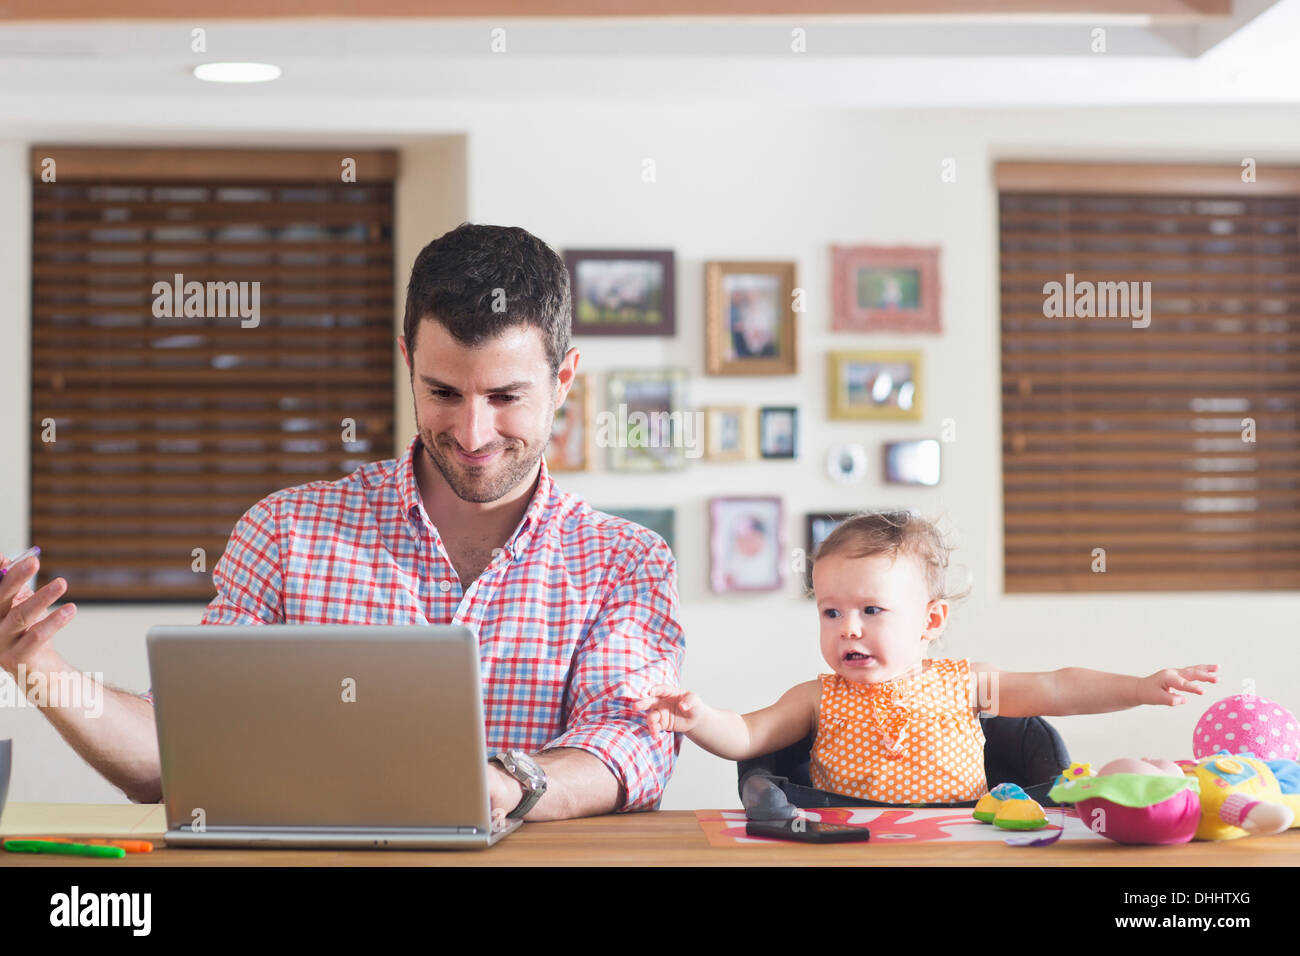 Man working at kitchen counter with baby sitting beside Stock Photo